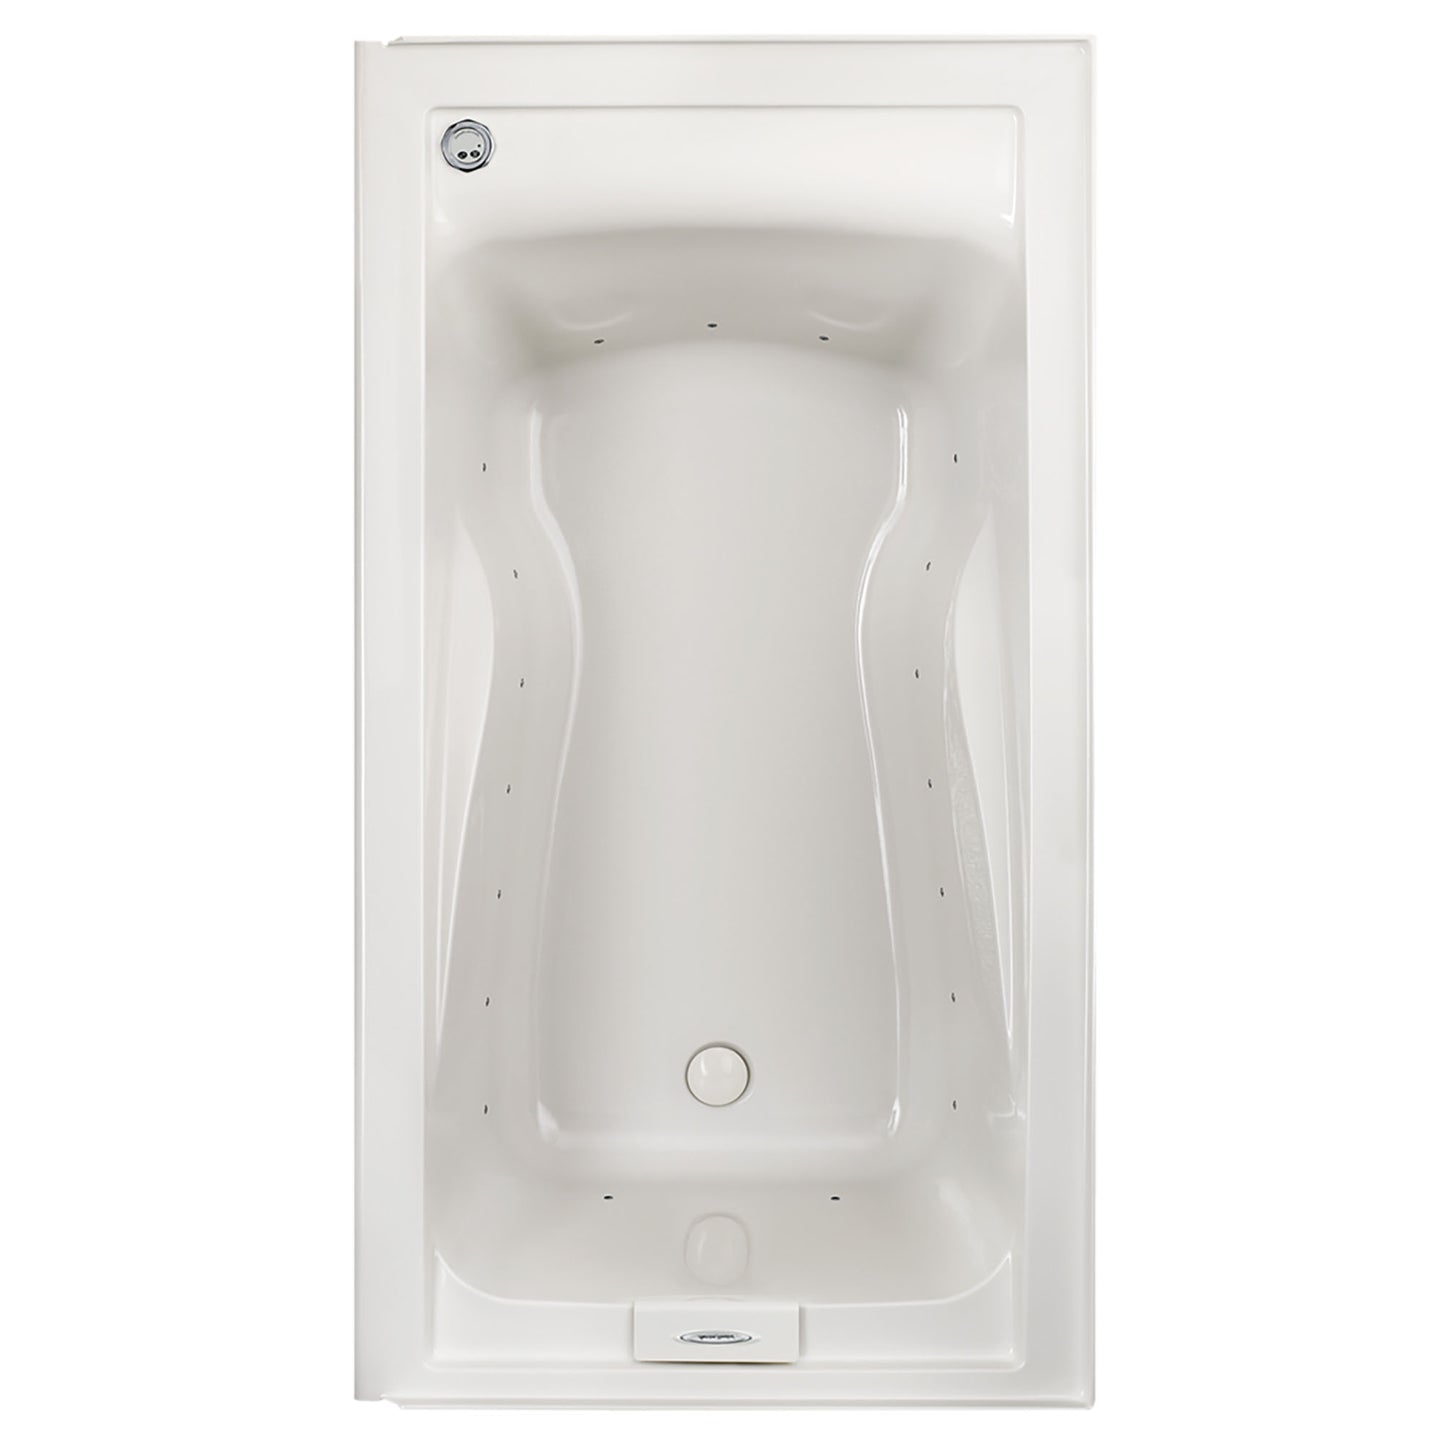 AMERICAN-STANDARD 2425V618C.020, Evolution 60 x 32-Inch Deep Soak Integral Apron Bathtub Left-Hand Outlet With EverClean Combination Spa System in White